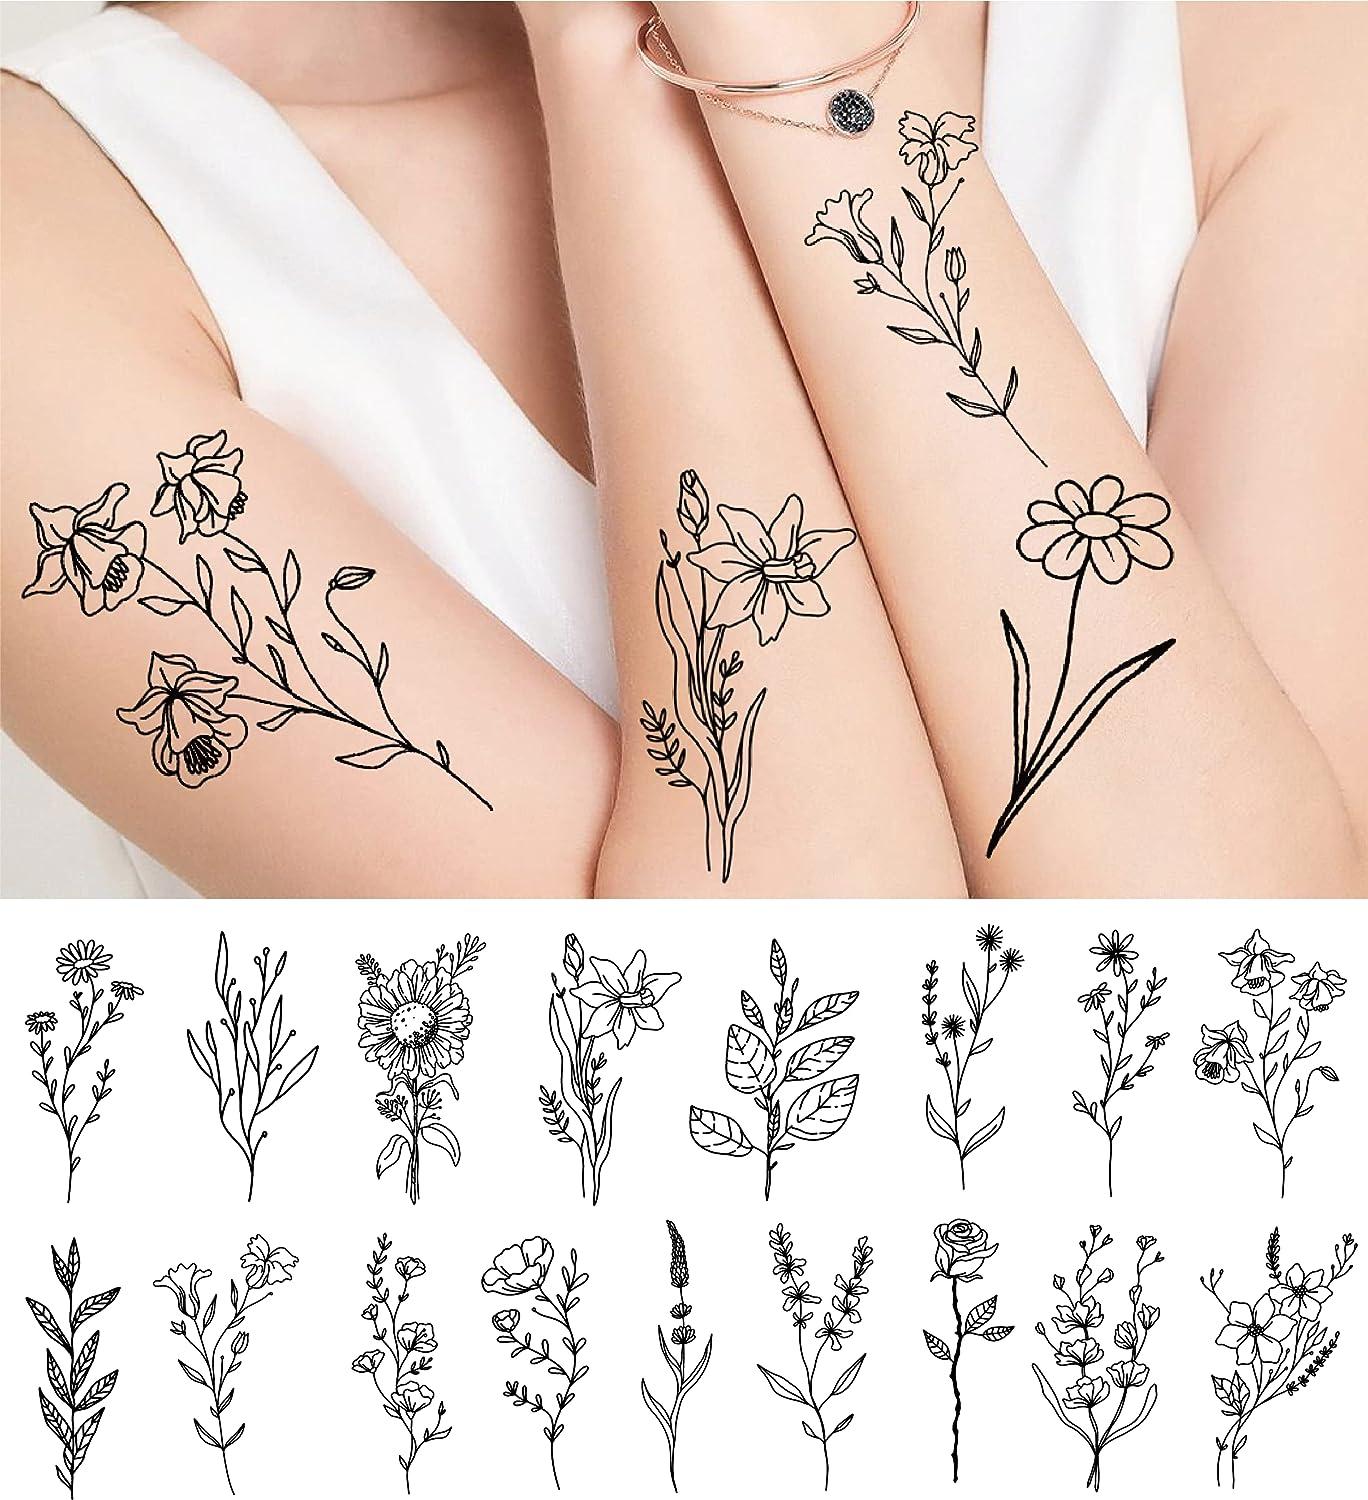 Realistic Small Black Mountain Nordic Temporary Tattoos For Men And Women  52 Sheets Of Adt Geometric Sea Weave Forest Pine Tree Topscissors From  Topscissors, $3.05 | DHgate.Com